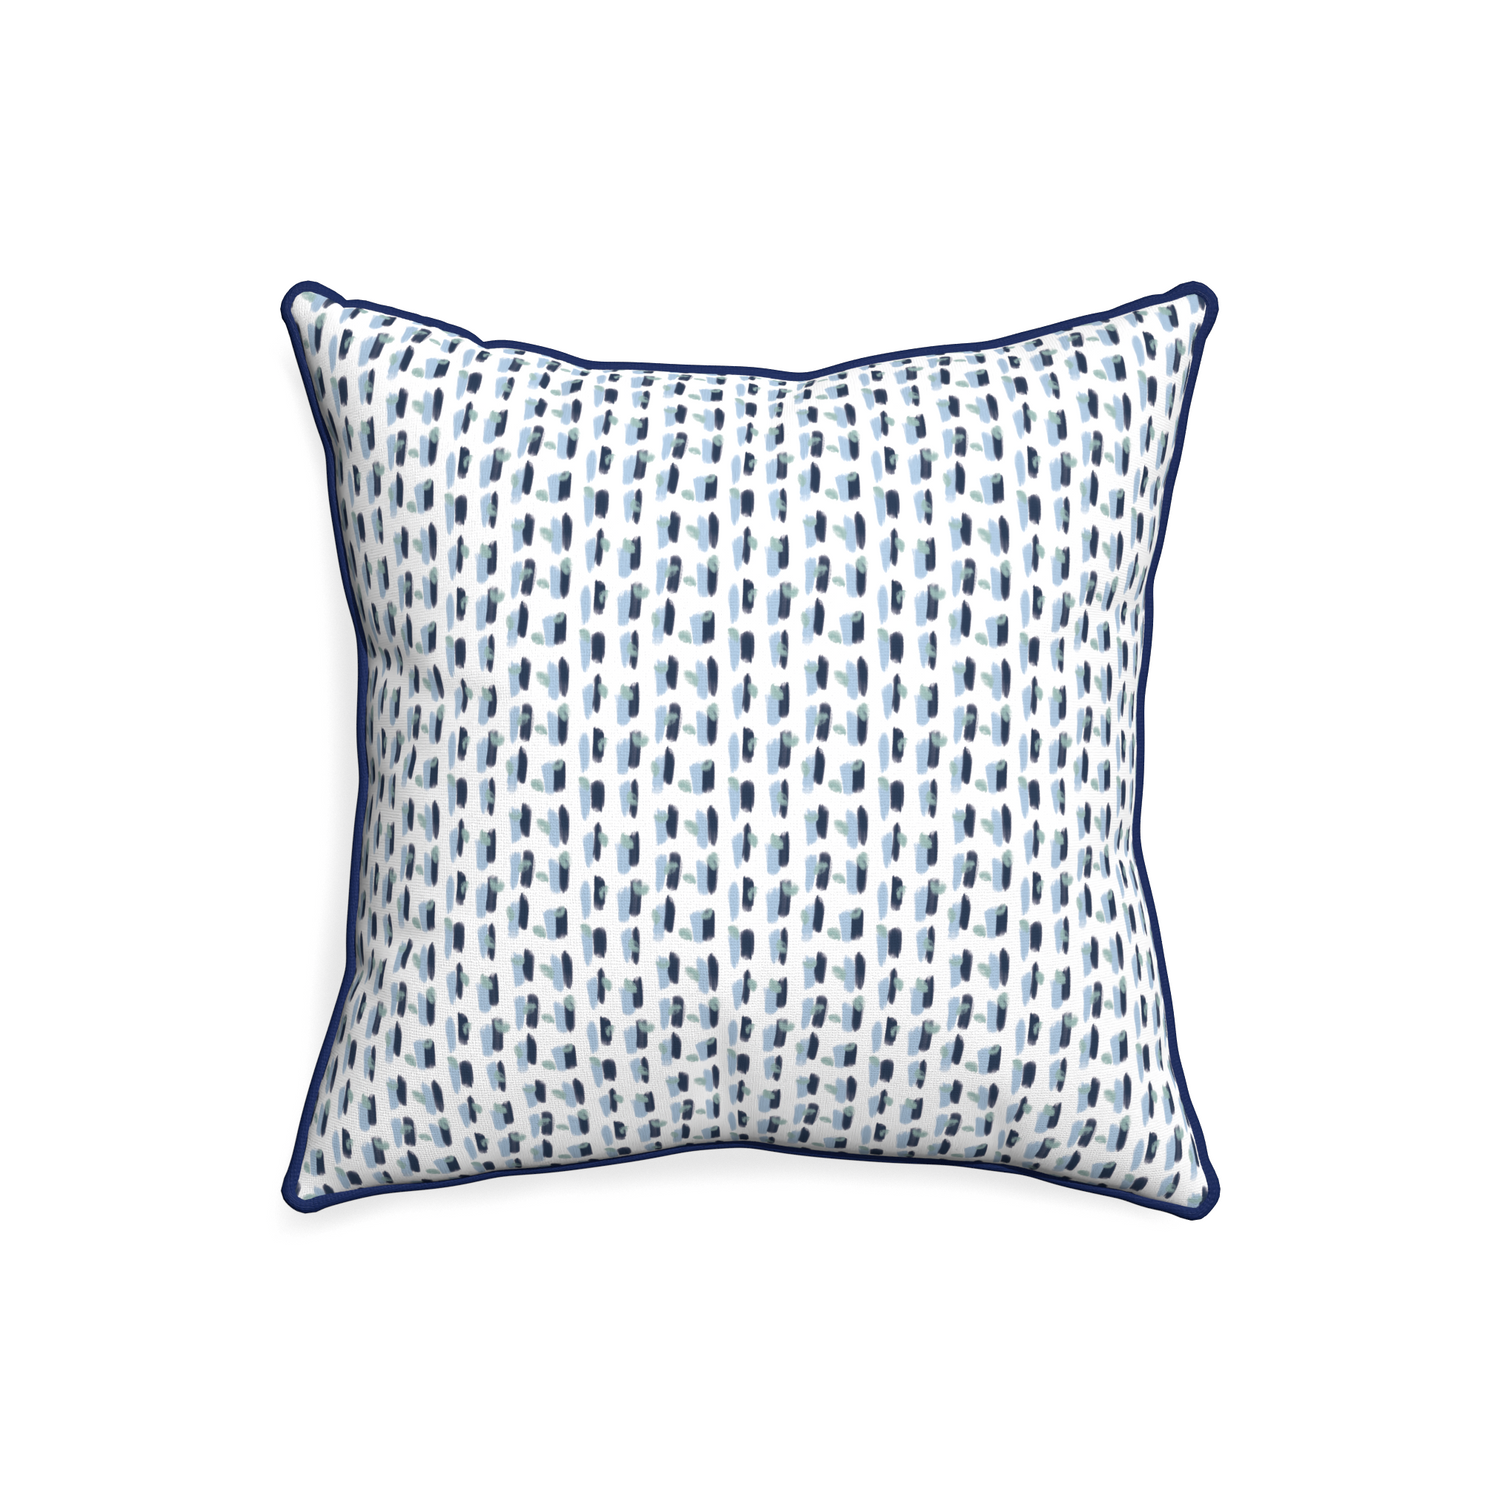 20-square poppy blue custom pillow with midnight piping on white background